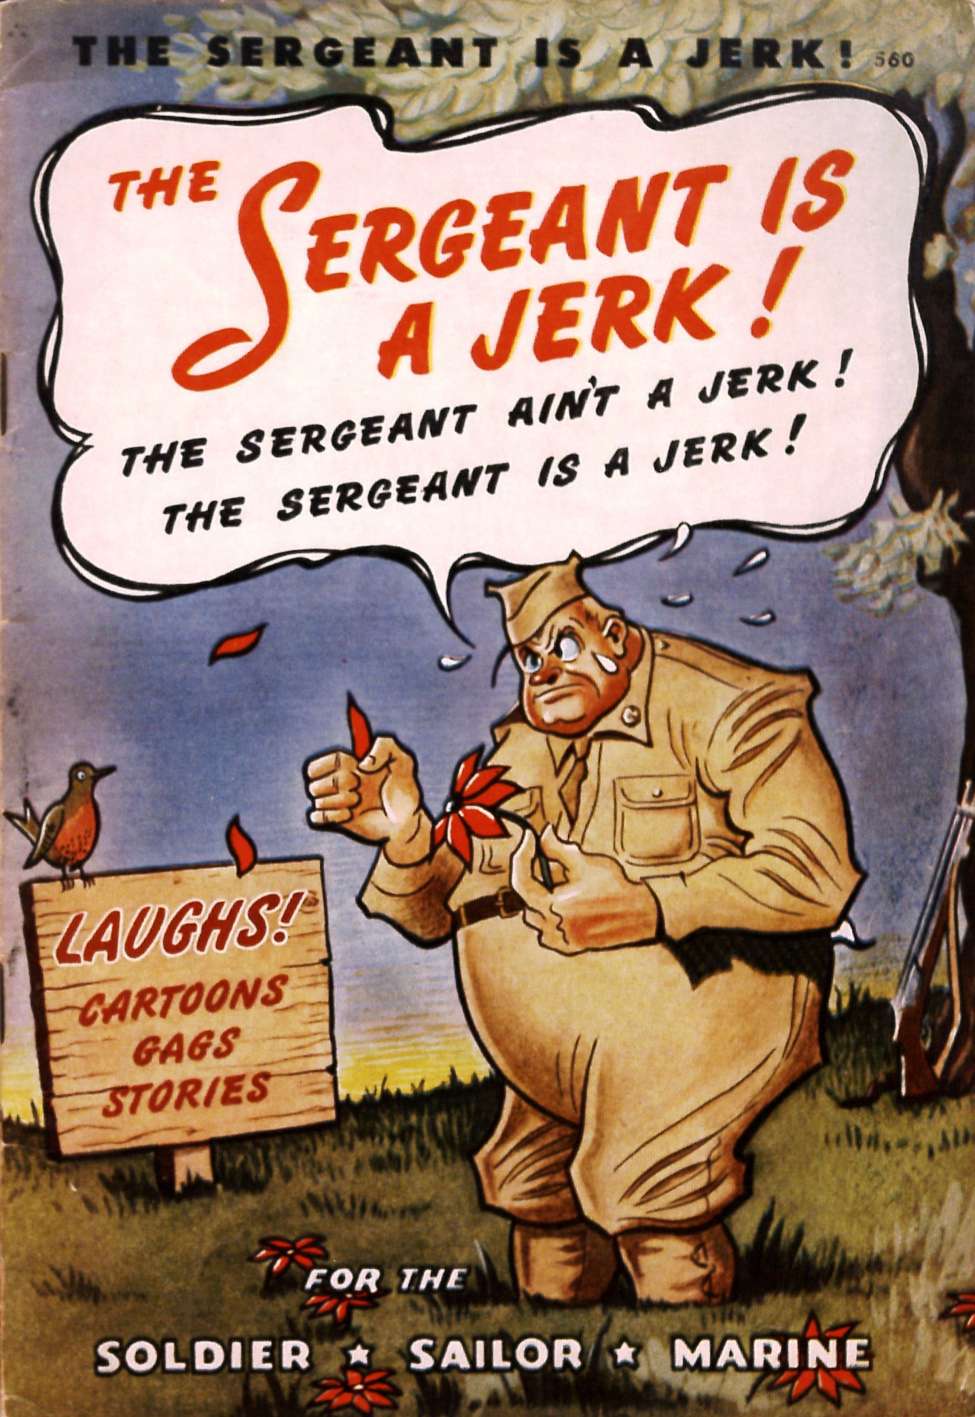 Book Cover For Best Books 560 - The Sergeant is a Jerk